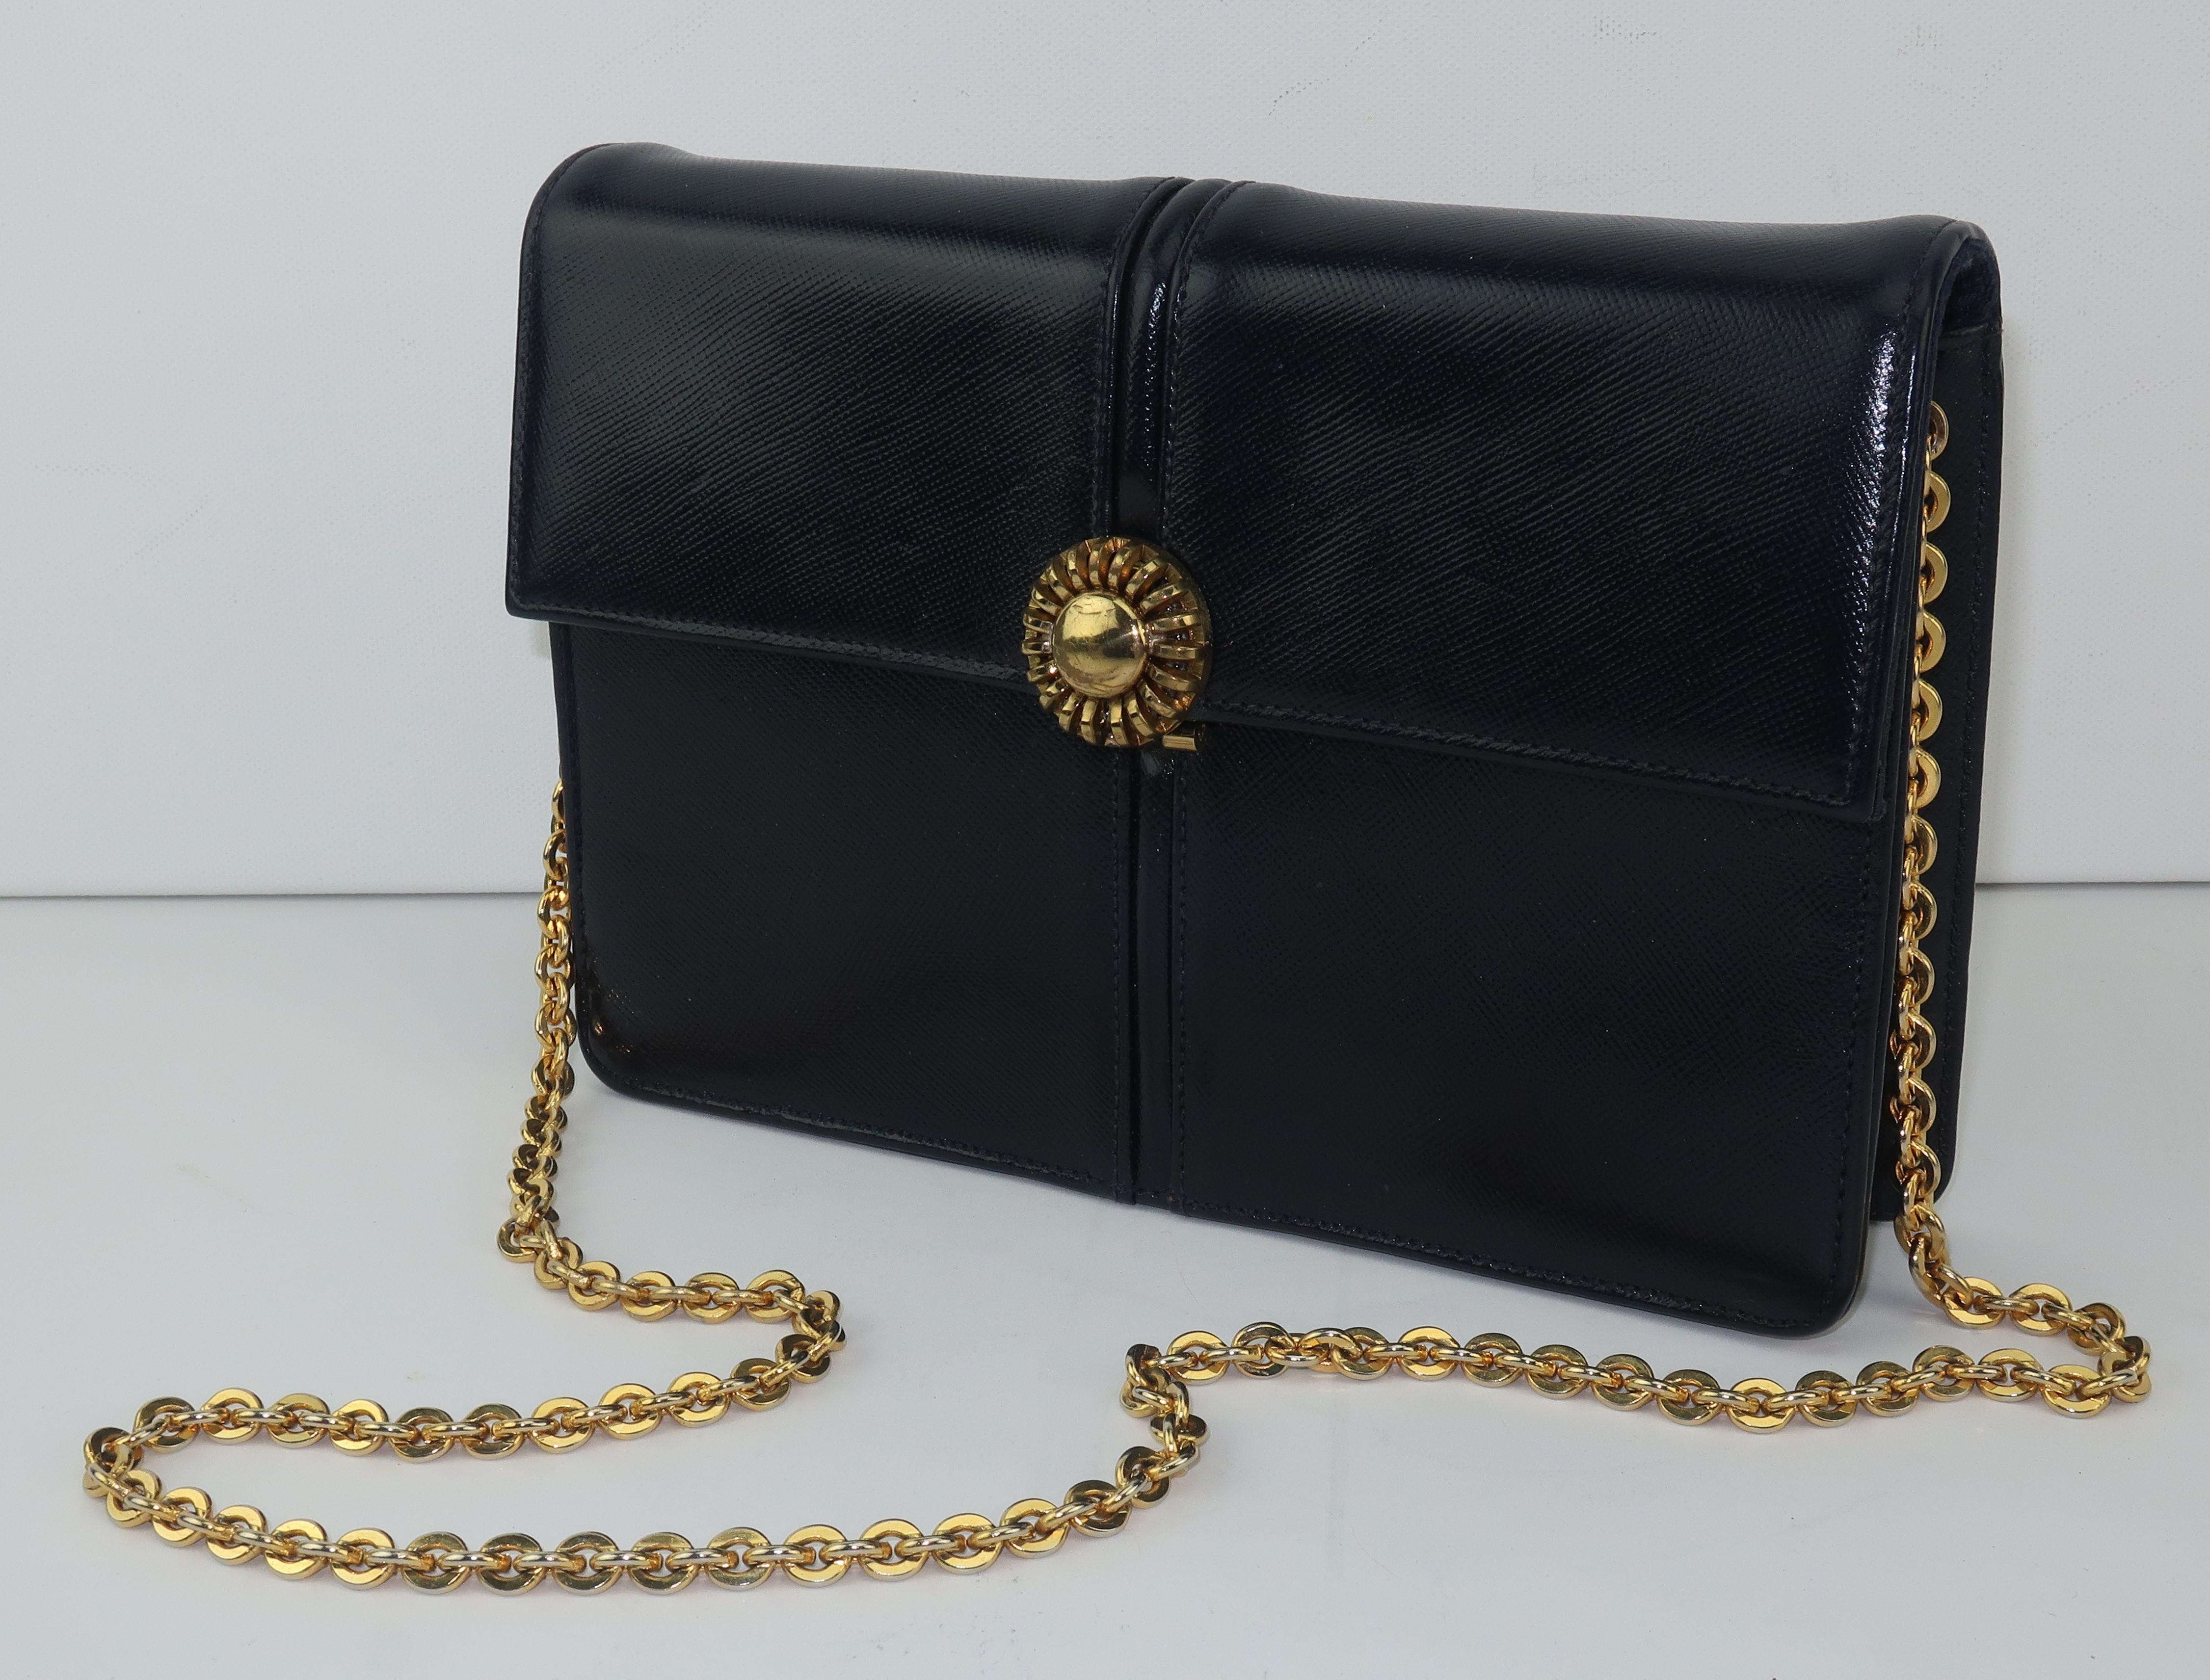 A period perfect 1960's ladylike black leather handbag by Block with sunburst style closure and chunky chain shoulder strap.  The sunburst closure hinges open to reveal a grosgrain fabric lined interior with one open pocket and a zippered